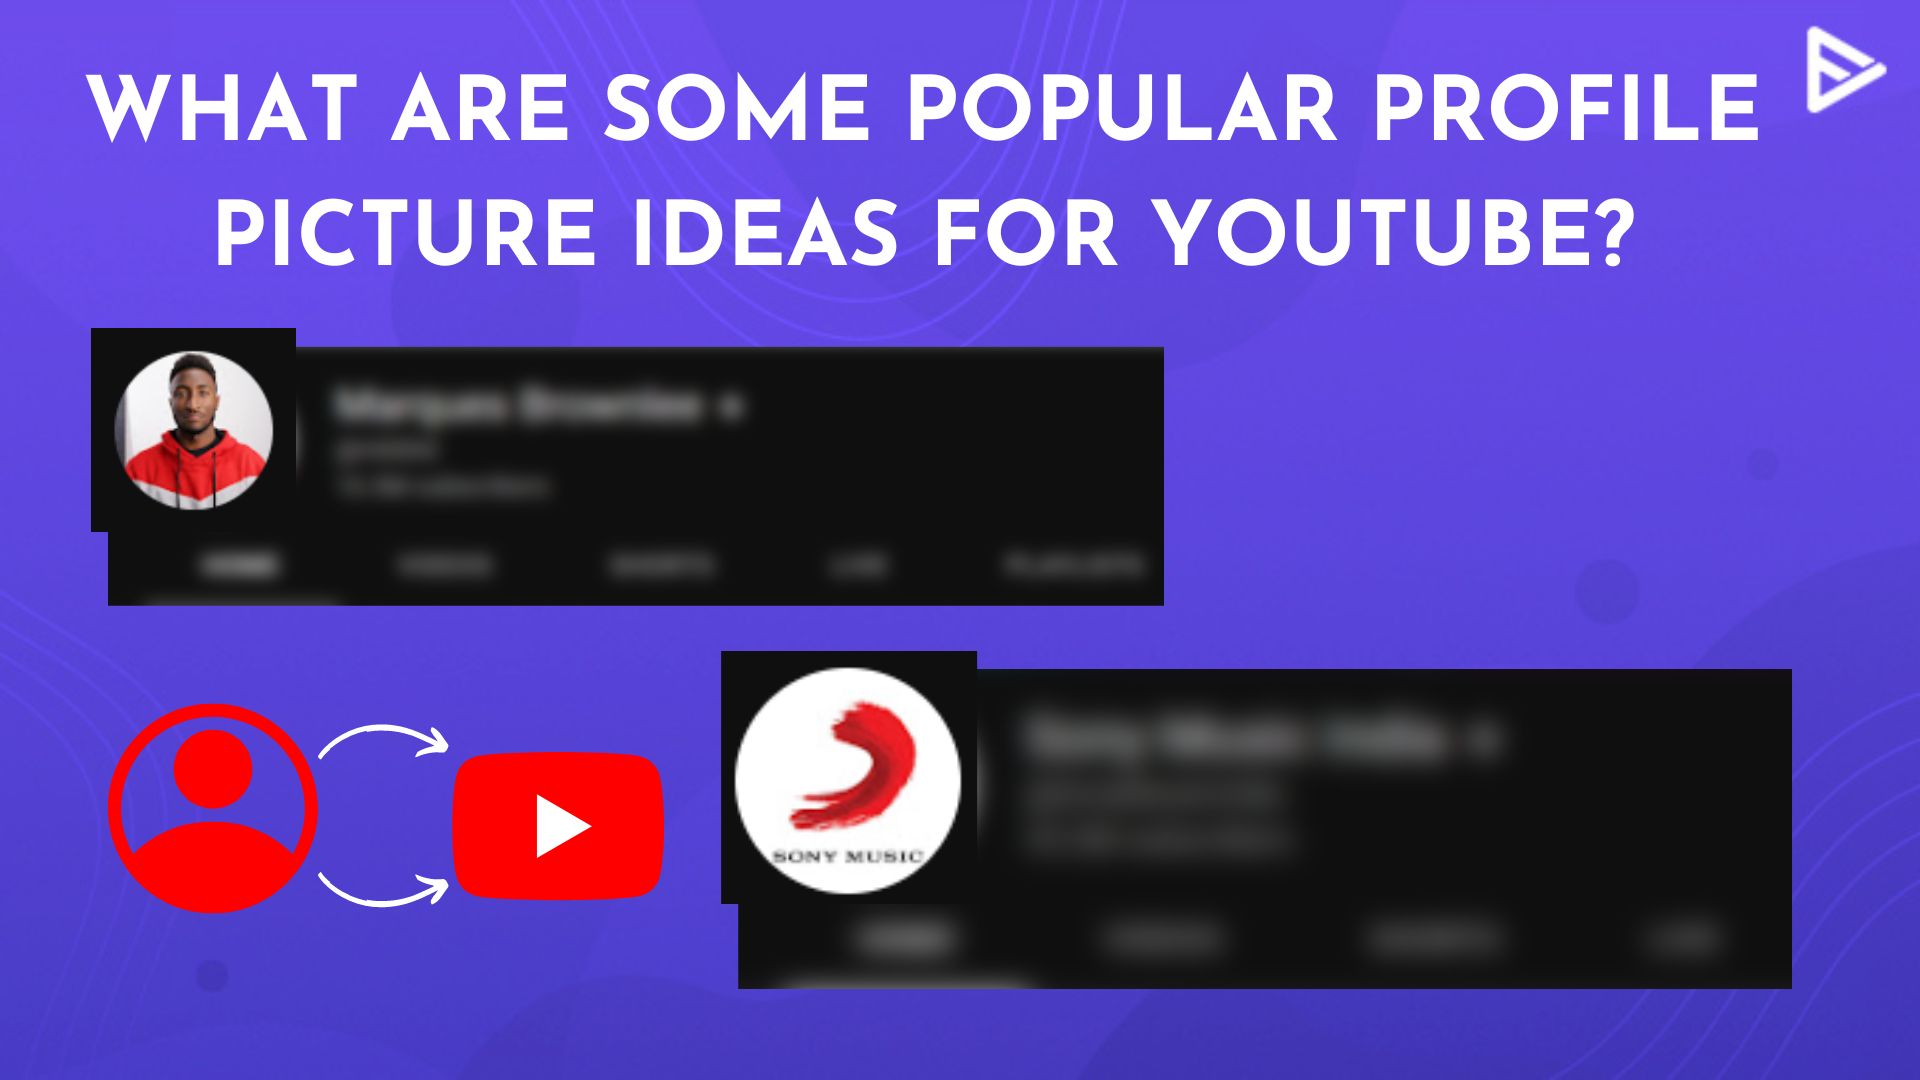 What Are Some Popular Profile Picture Ideas For YouTube